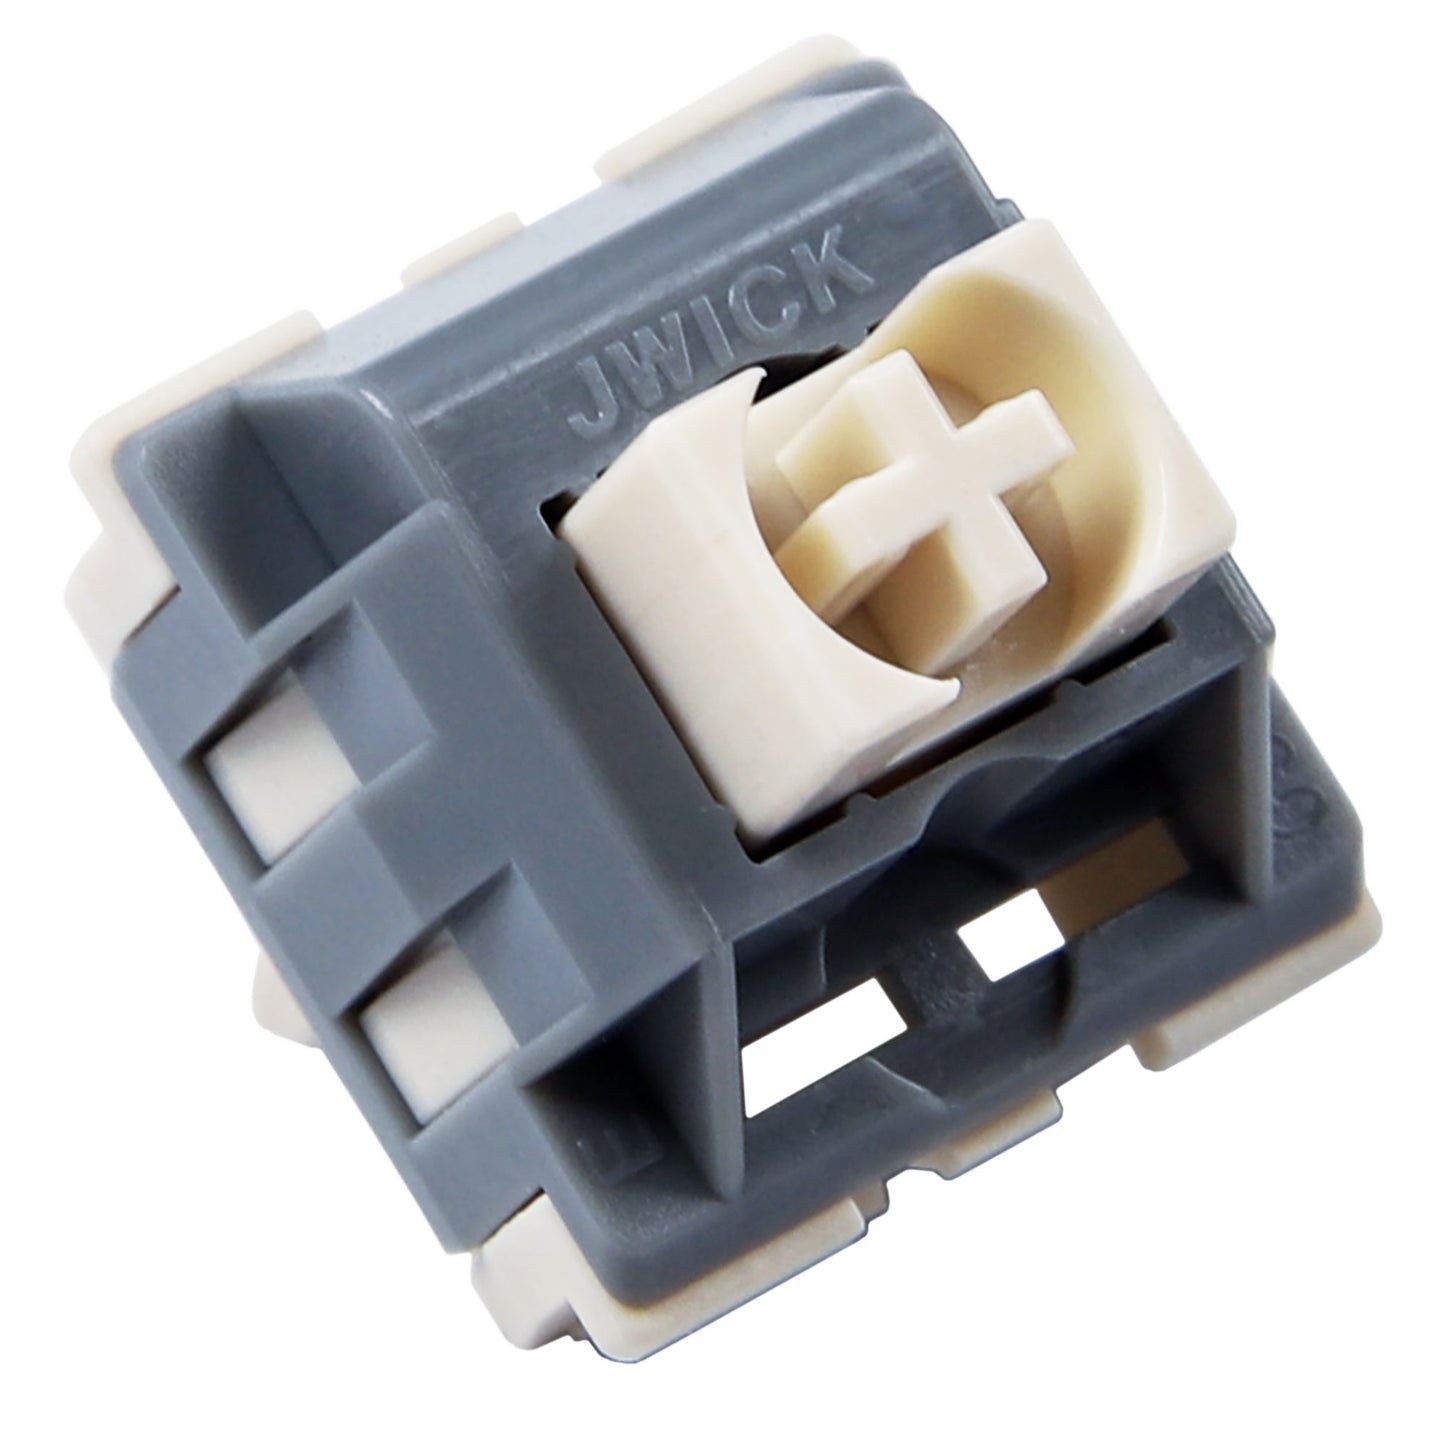 JWICK Box Semi-Silent Switches(5 Pin 62g Linear/RGB SMD) - IPOPULARSHOP